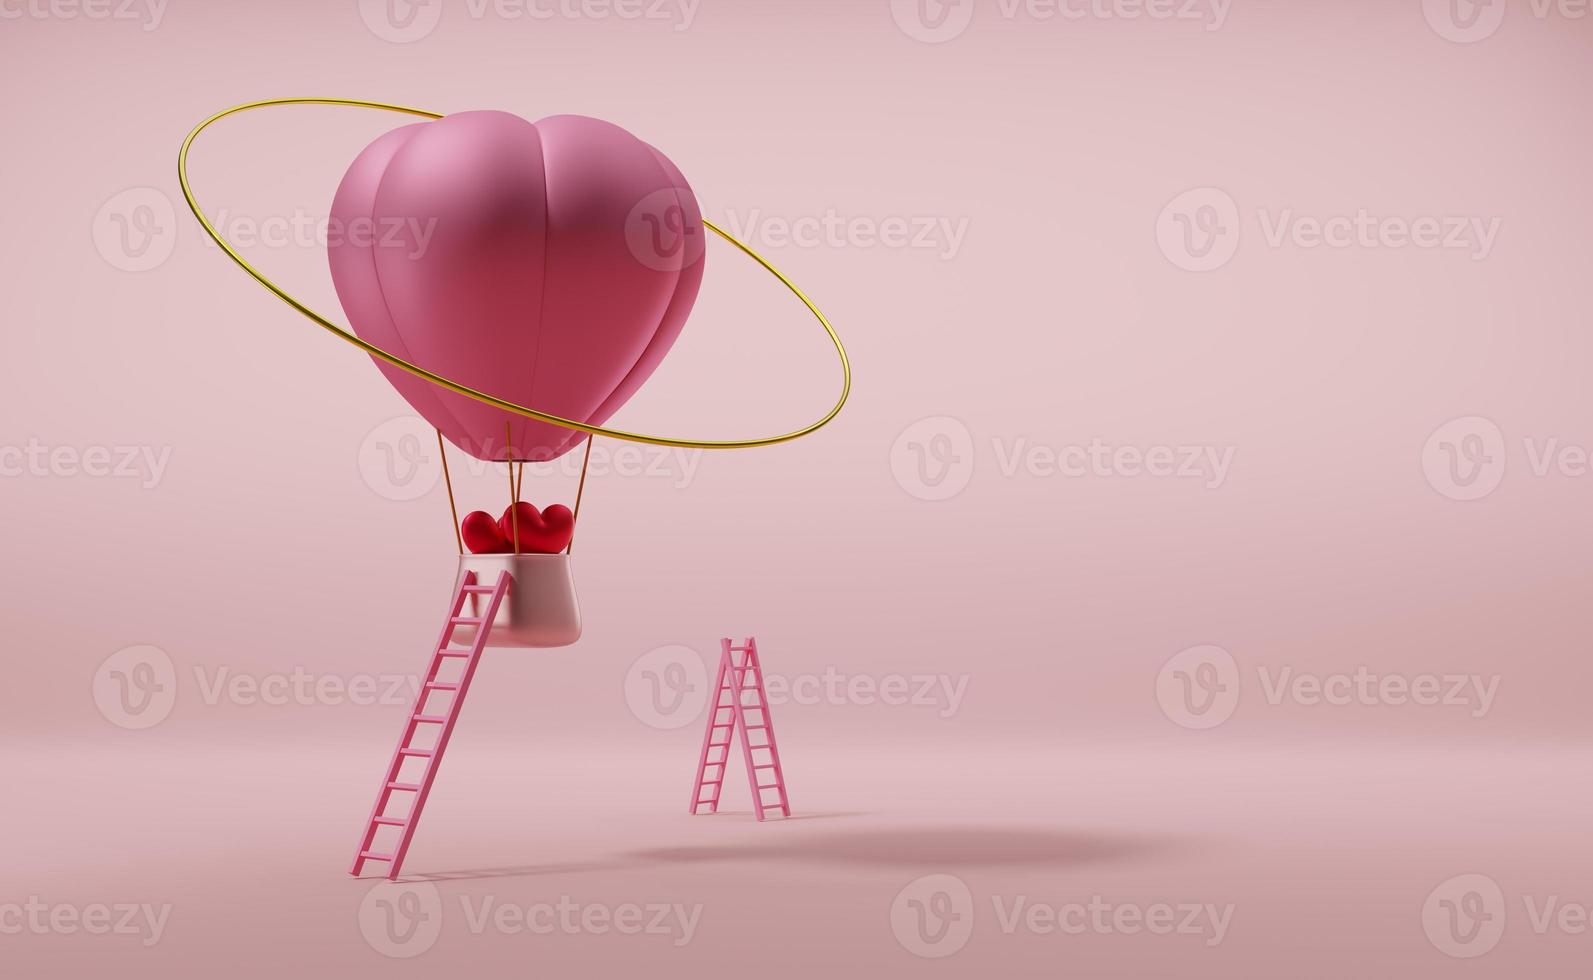 Hot air balloon with red heart shaped for Valentine's Day background in pink pastel composition ,3d illustration or 3d render photo